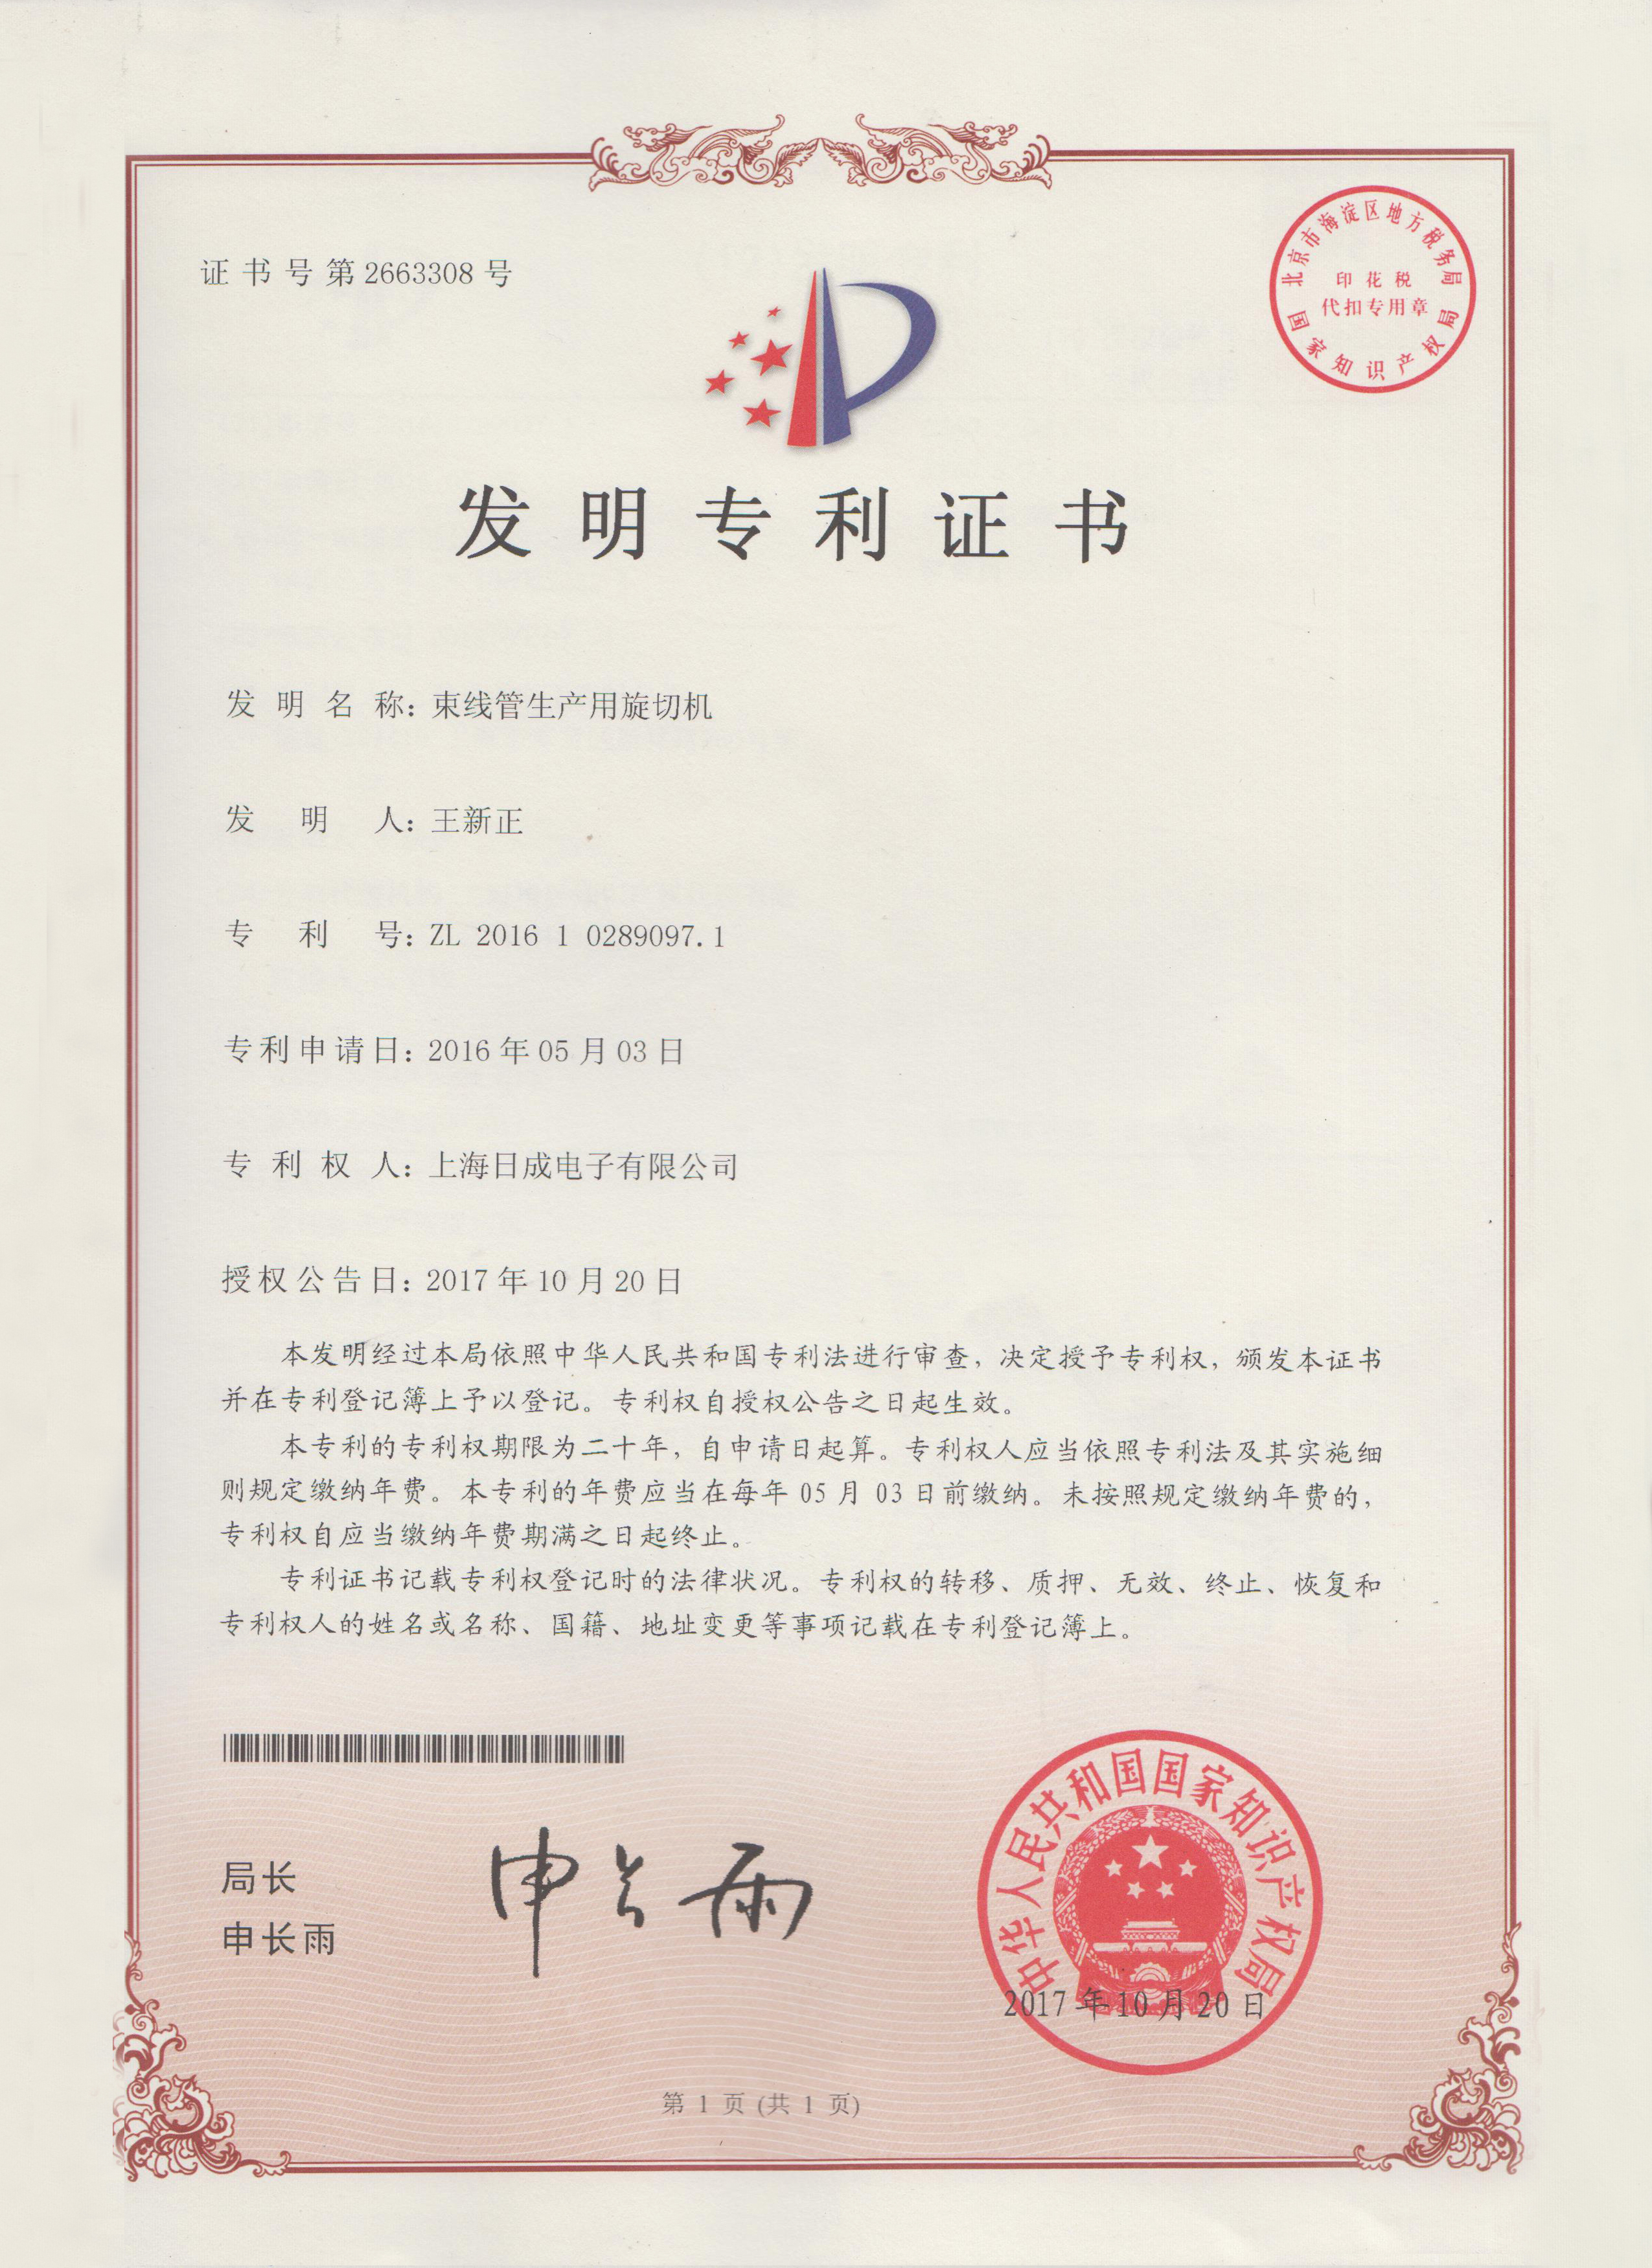 Wire harness production peeling machine  -Patent Certificate No:2663308